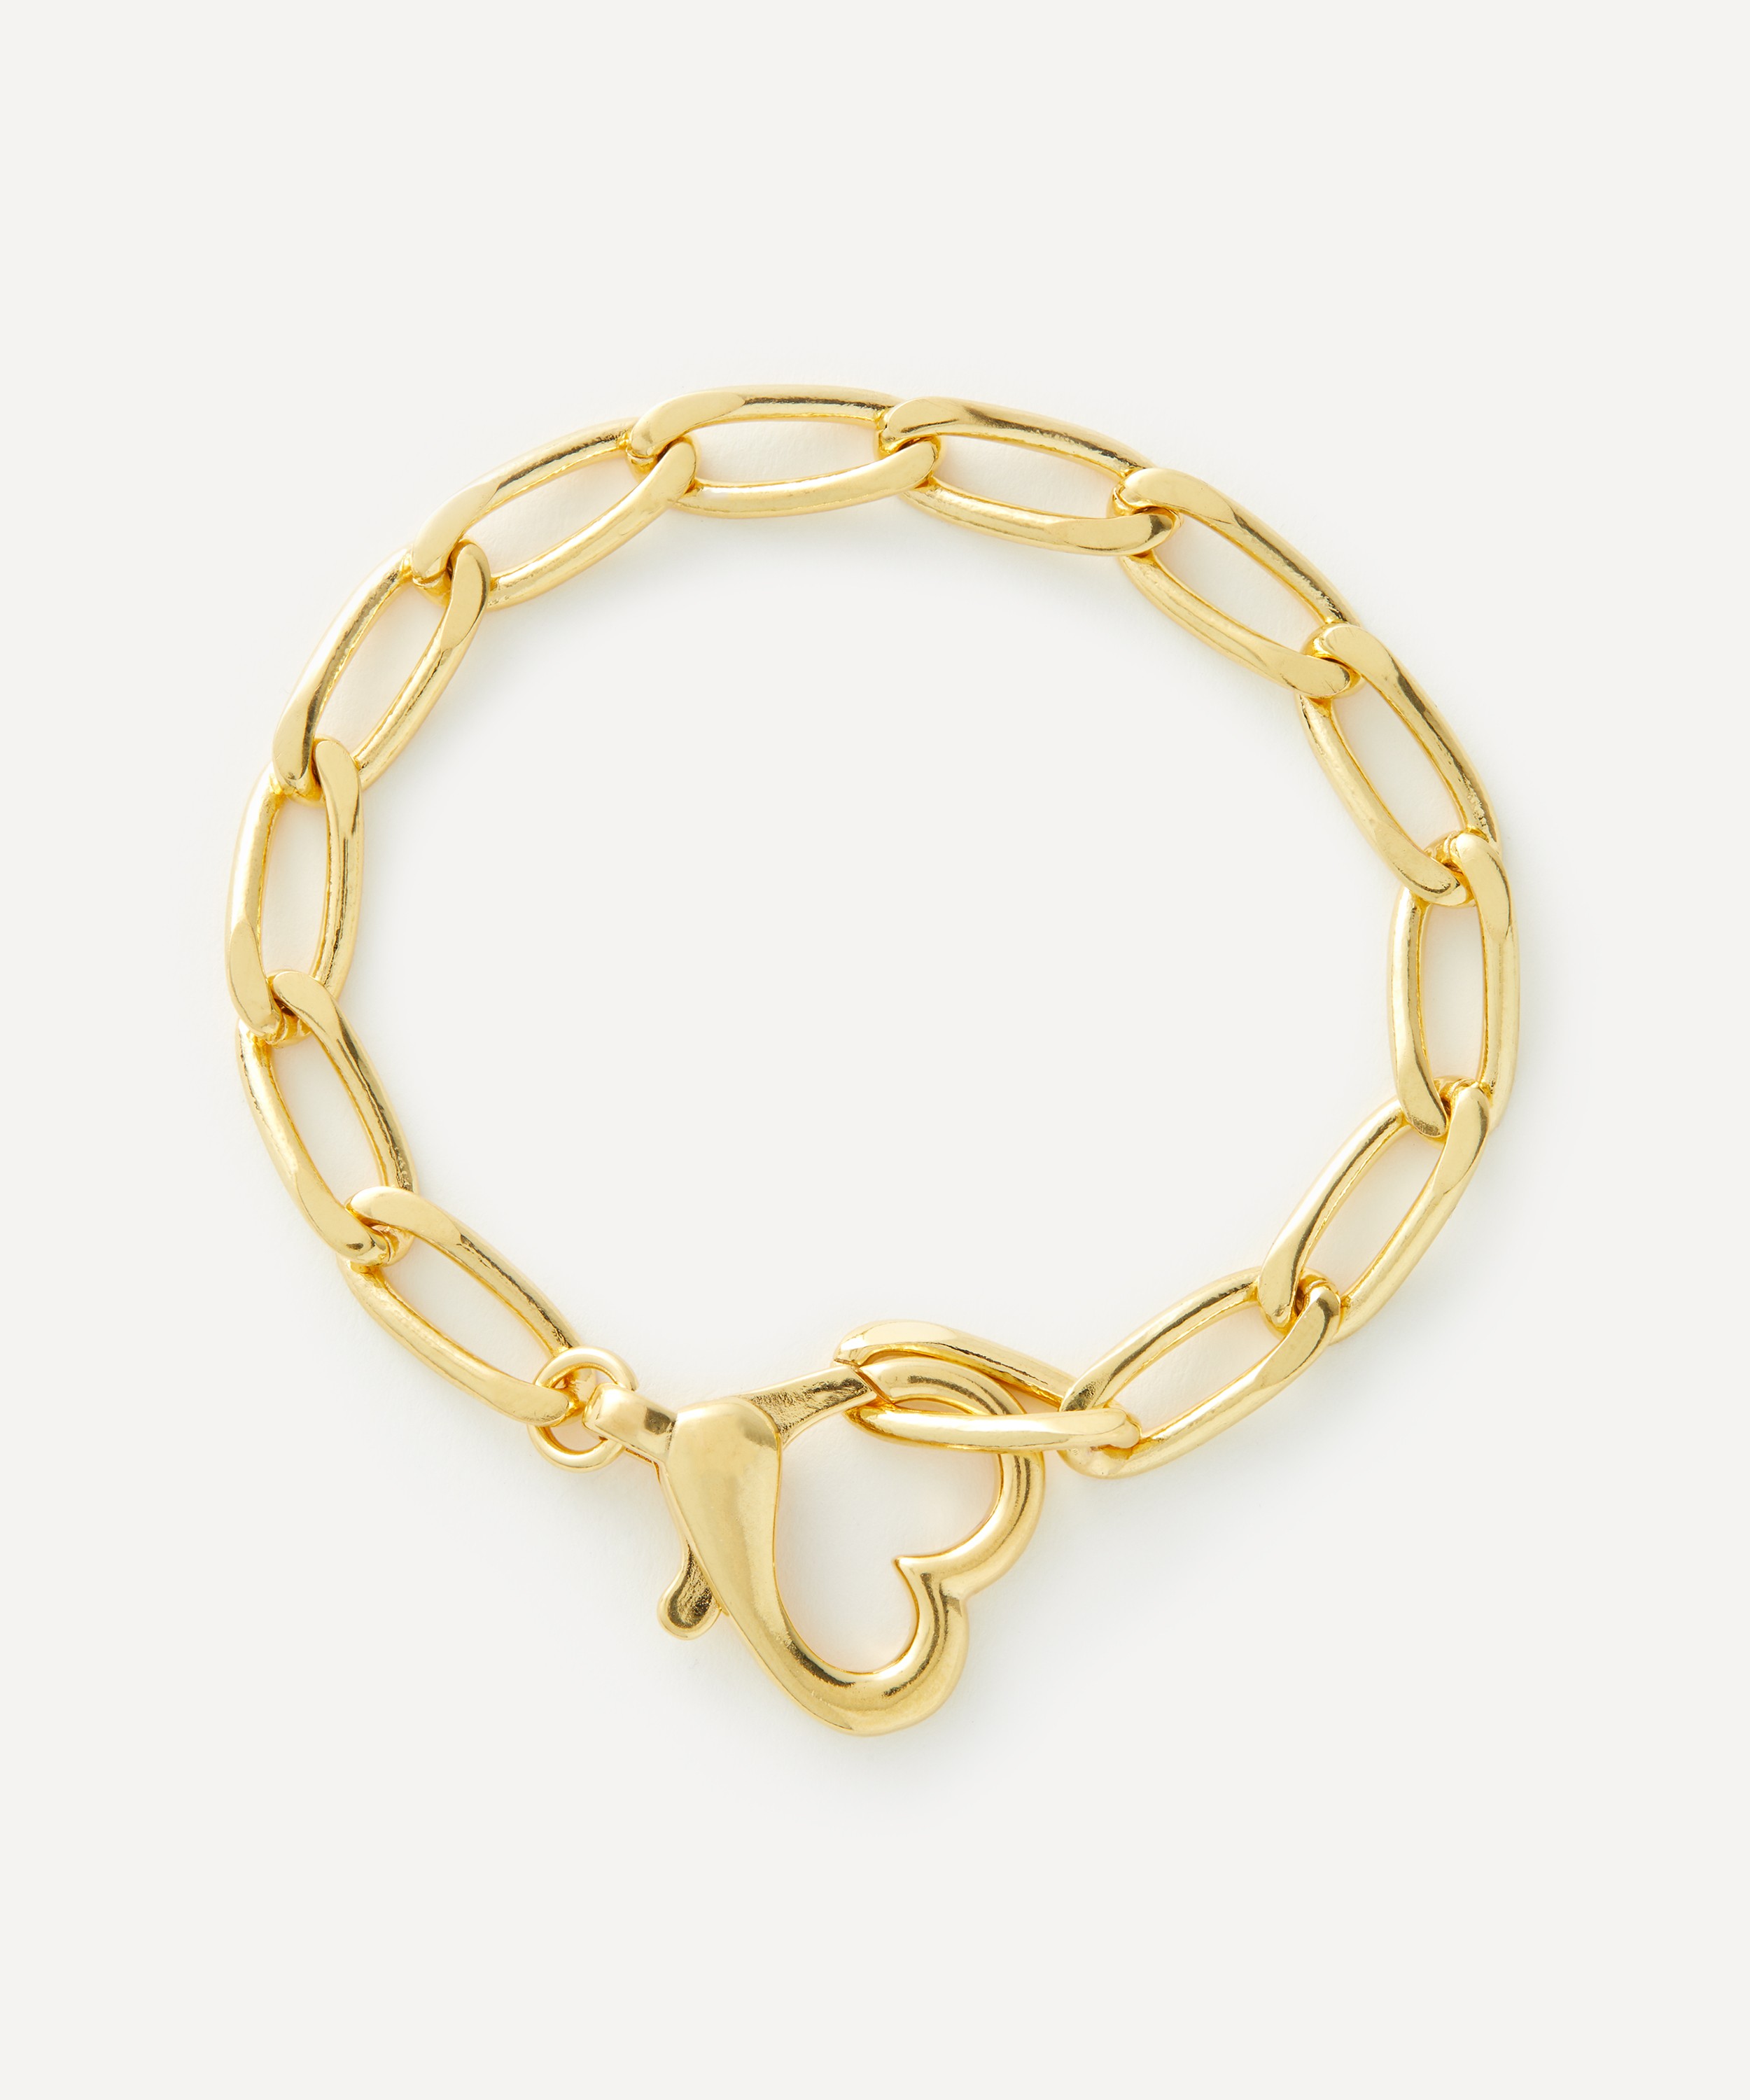 Anna + Nina - Gold-Plated Locked Love Chain Bracelet image number 0